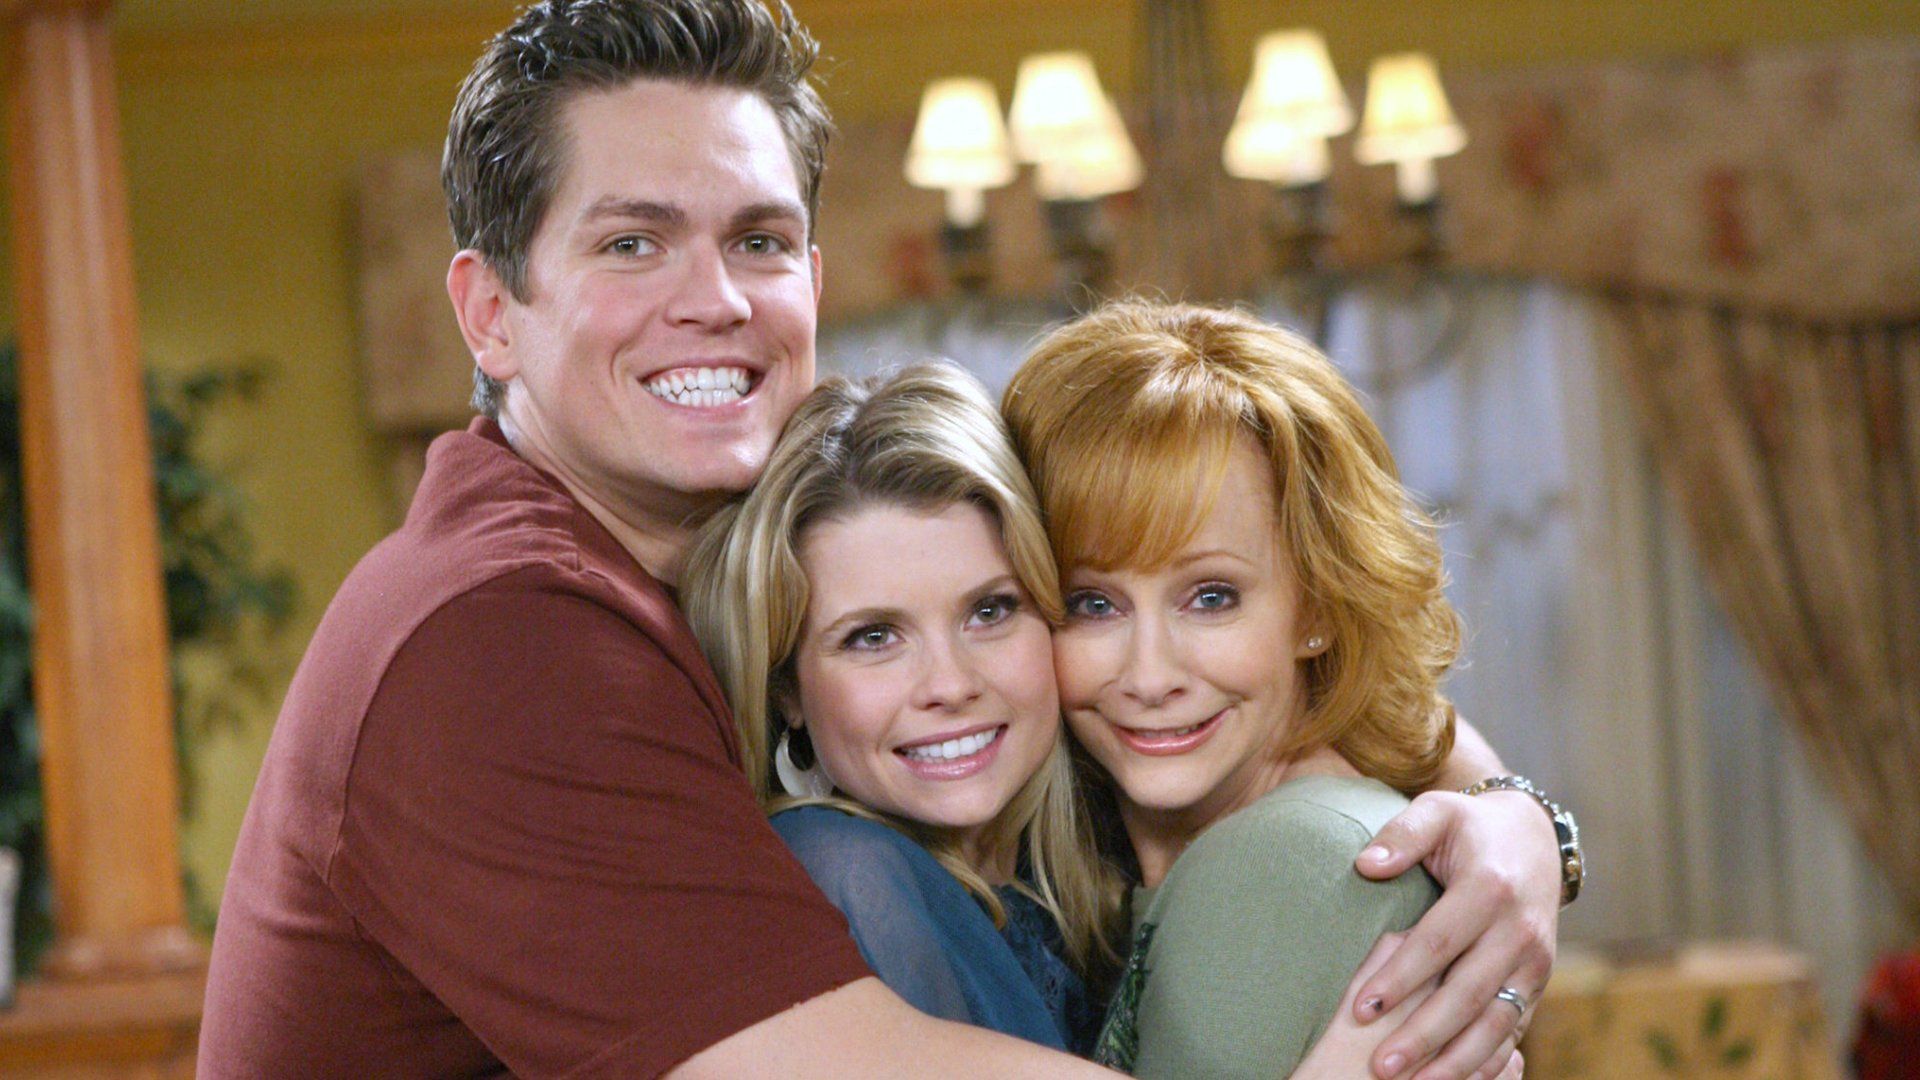 Early 2000s Sitcoms Which Defined That Era Of TV